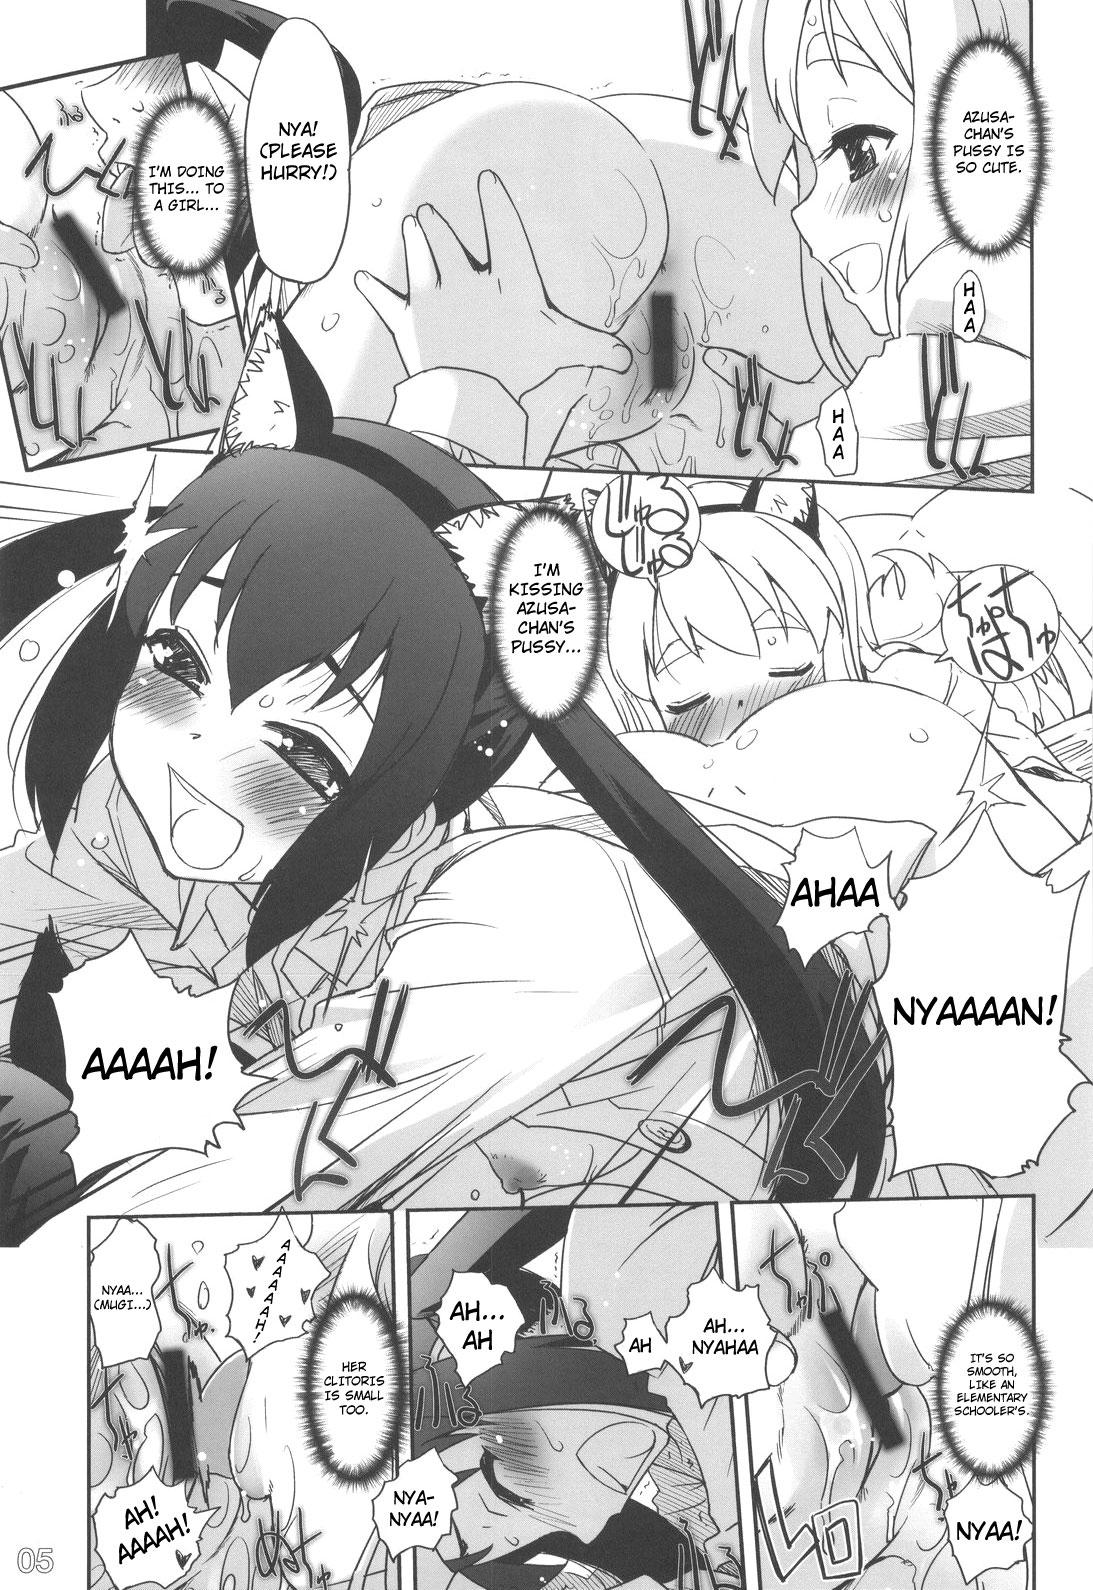 Wrestling Nekomimi to Toilet to Houkago no Bushitsu | Cat Ears And A Restroom And The Club Room After School - K-on Free Oral Sex - Page 4